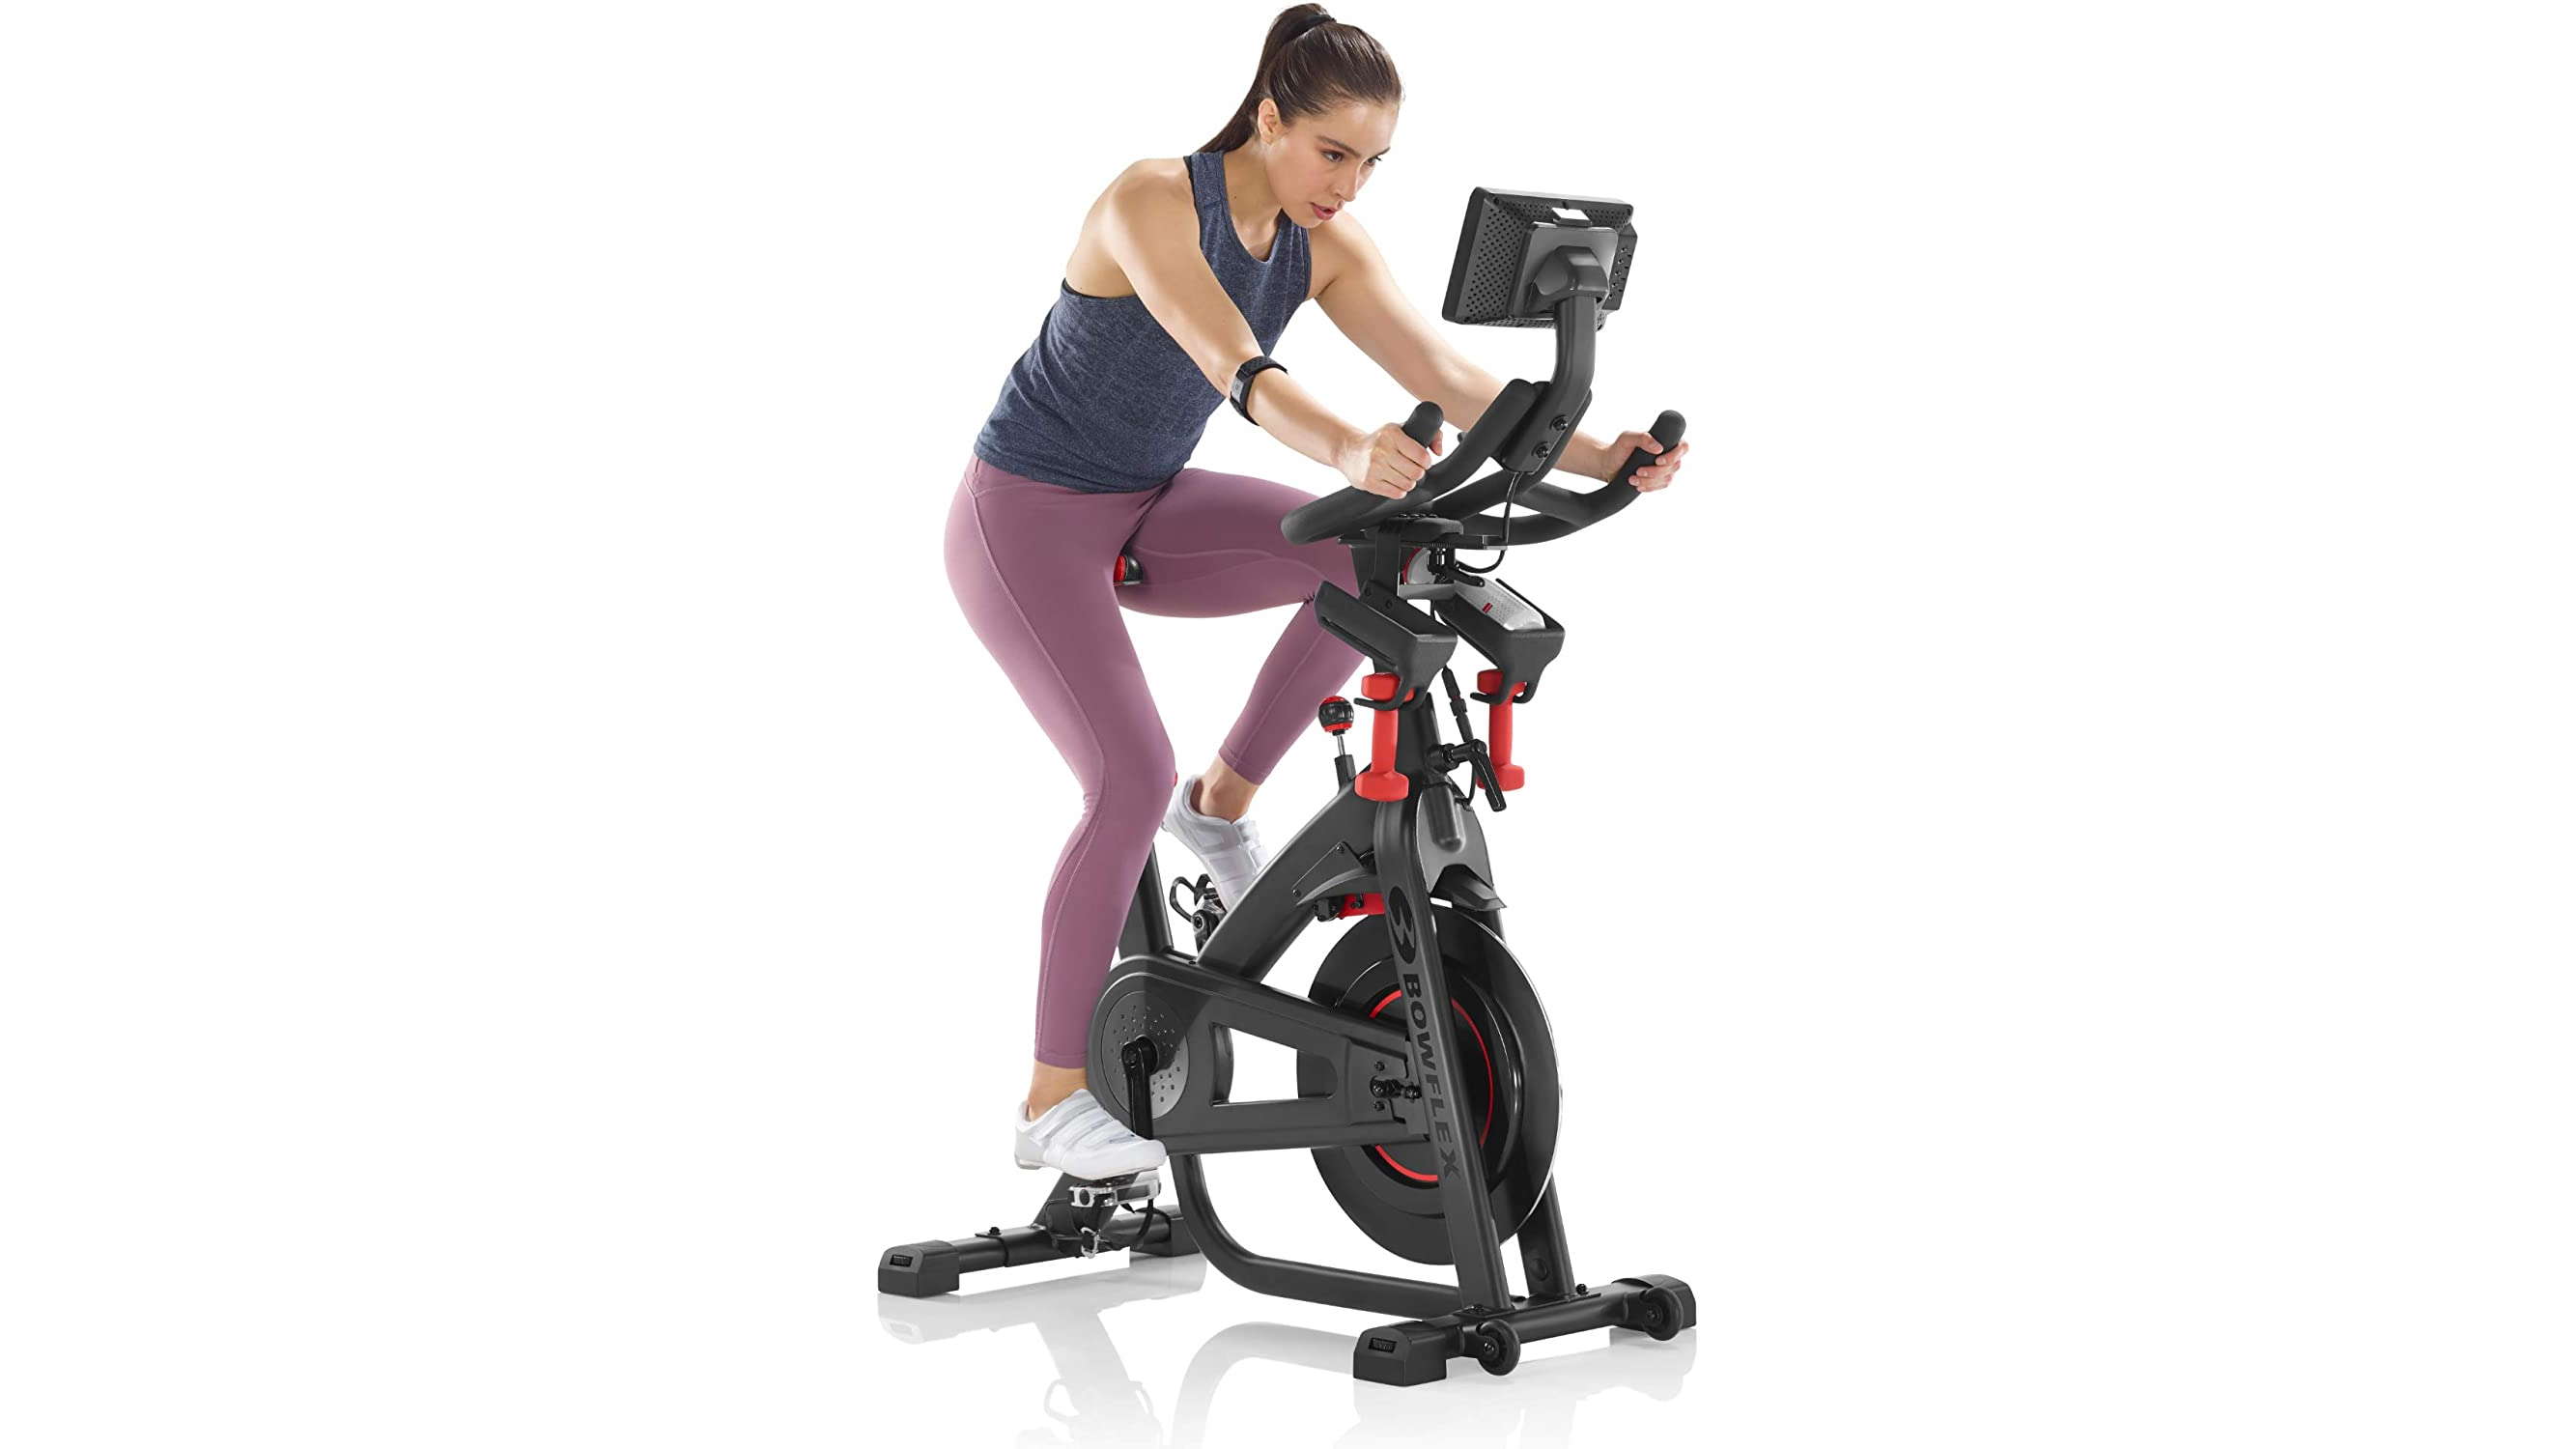 Details about   Adjustable Indoor Cycling Exercise Bike Aerobic Studio Cycle Home Cardio 